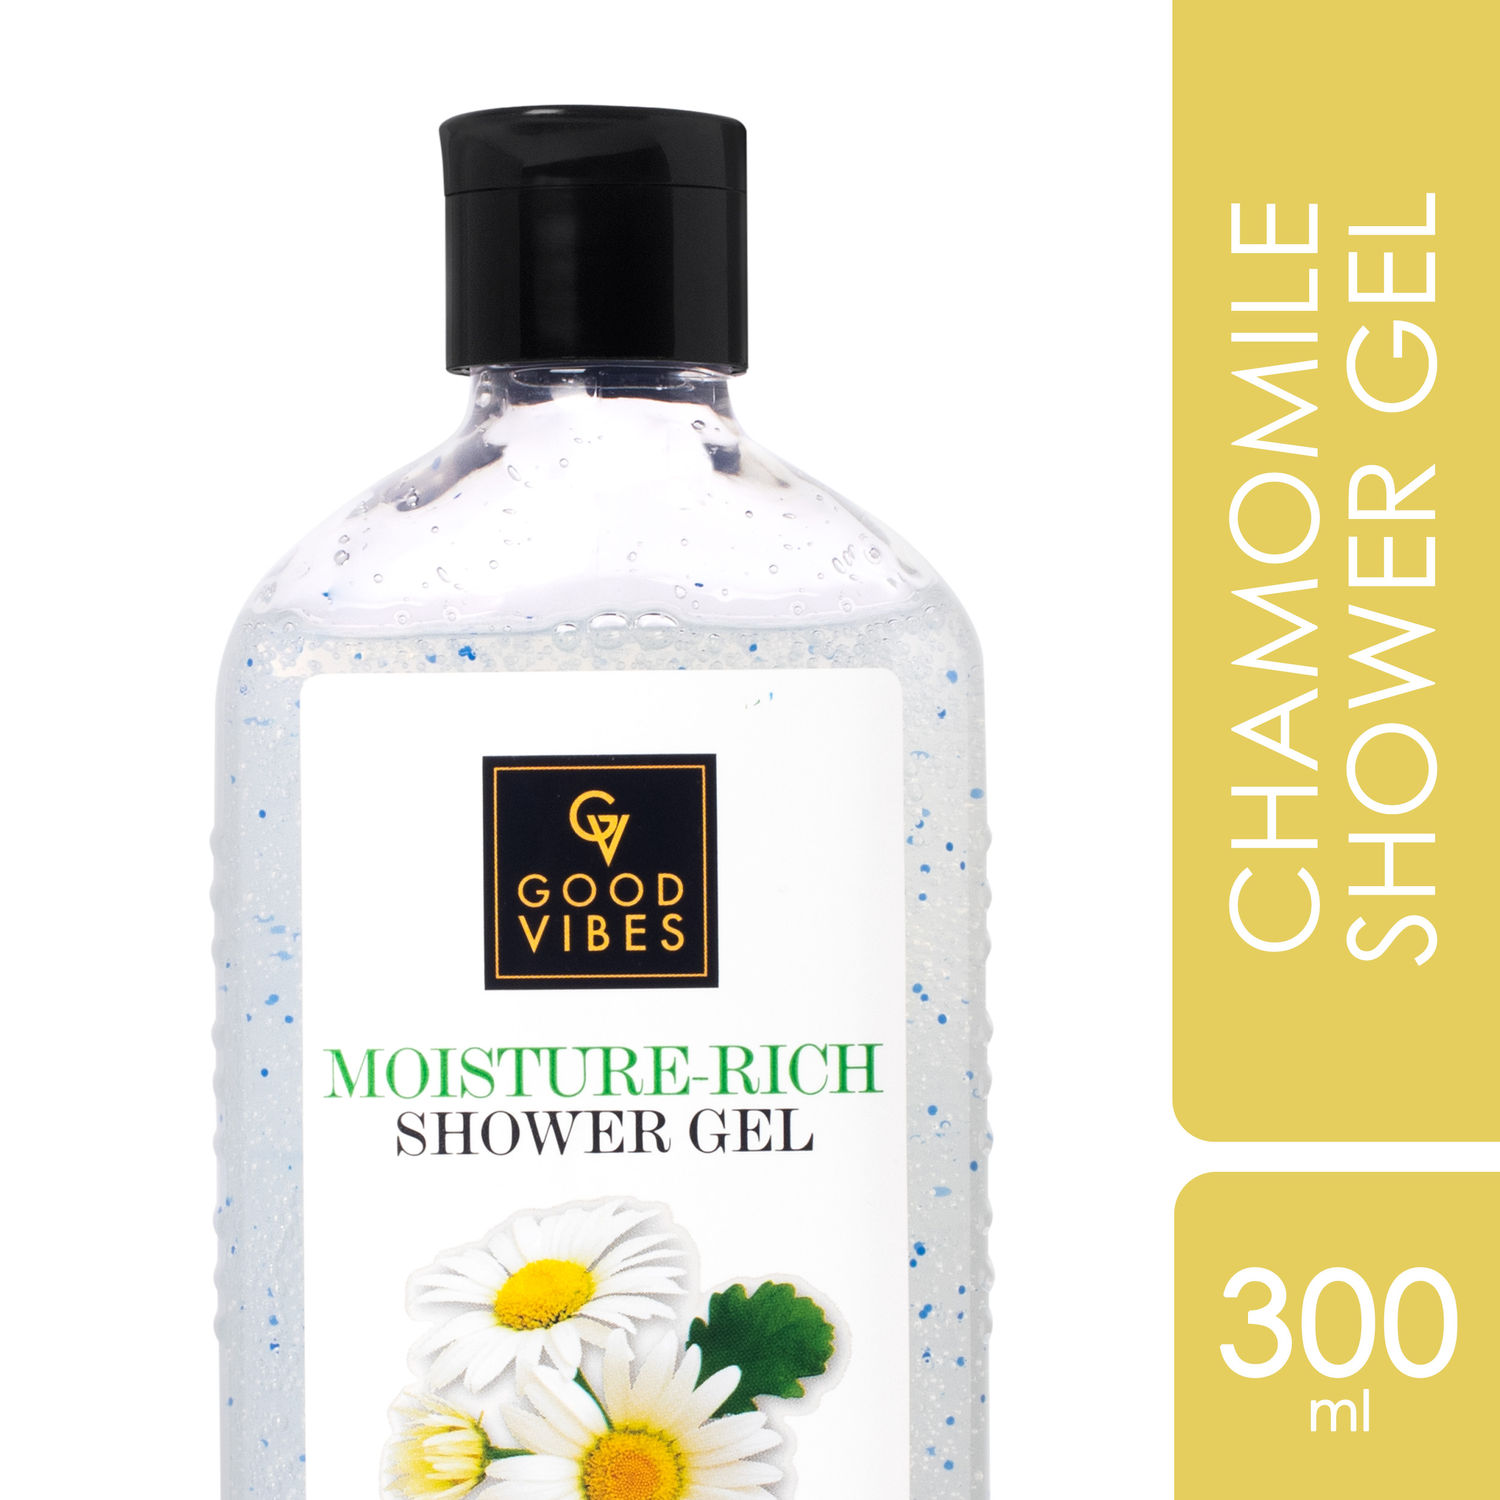 Good Vibes Chamomile Moisture Rich Shower Gel | Soothing, Moisturizing | | Vegan, No Parabens, No Mineral Oil, Certified Fragrance (300 ml)